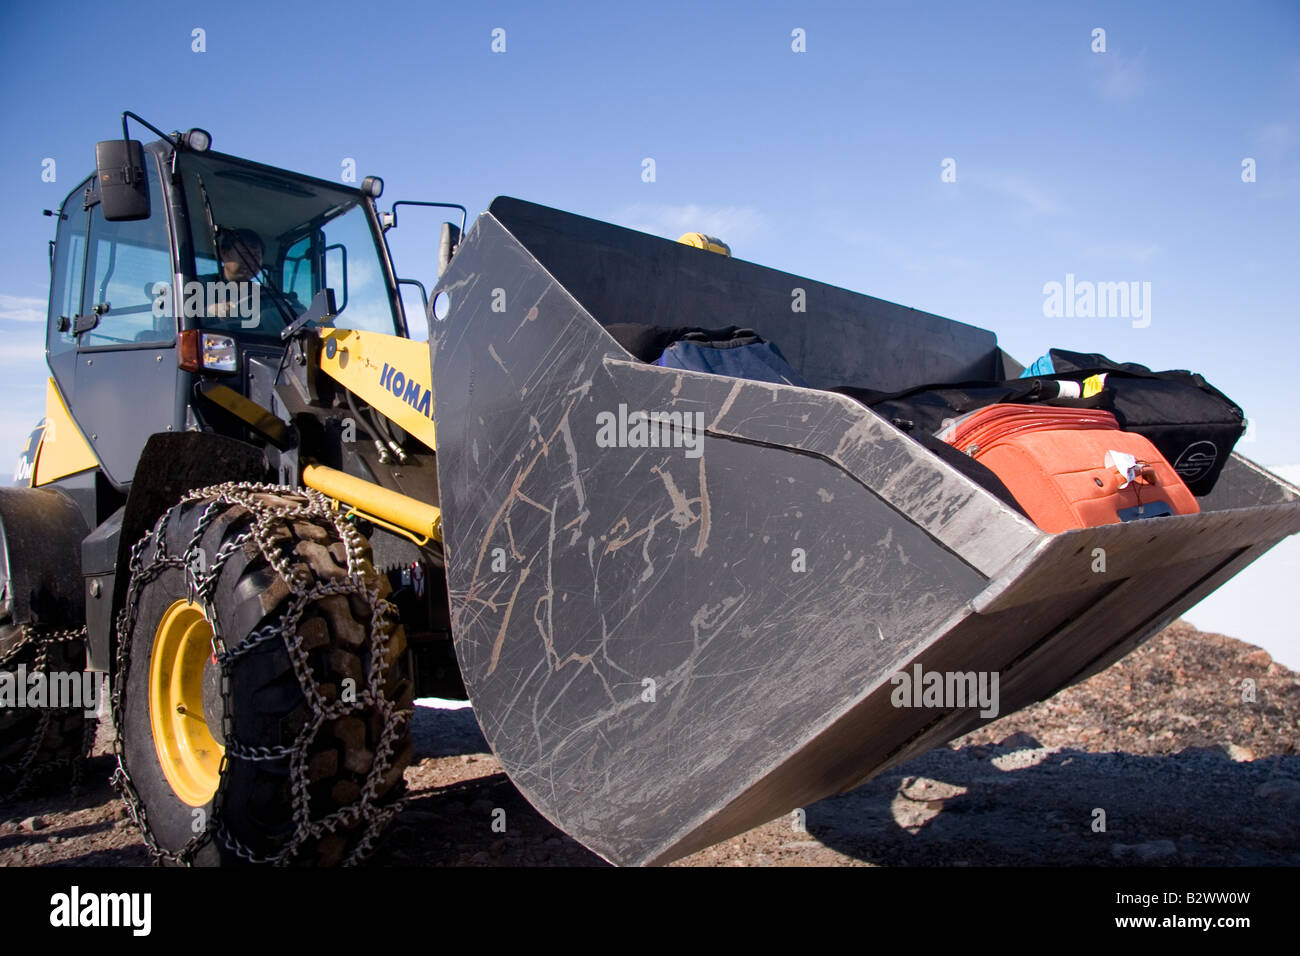 A baggage handler transports suitcases by tractor in the village of Ittoqqortoormiit, Scoresbysund, East Greenland Stock Photo